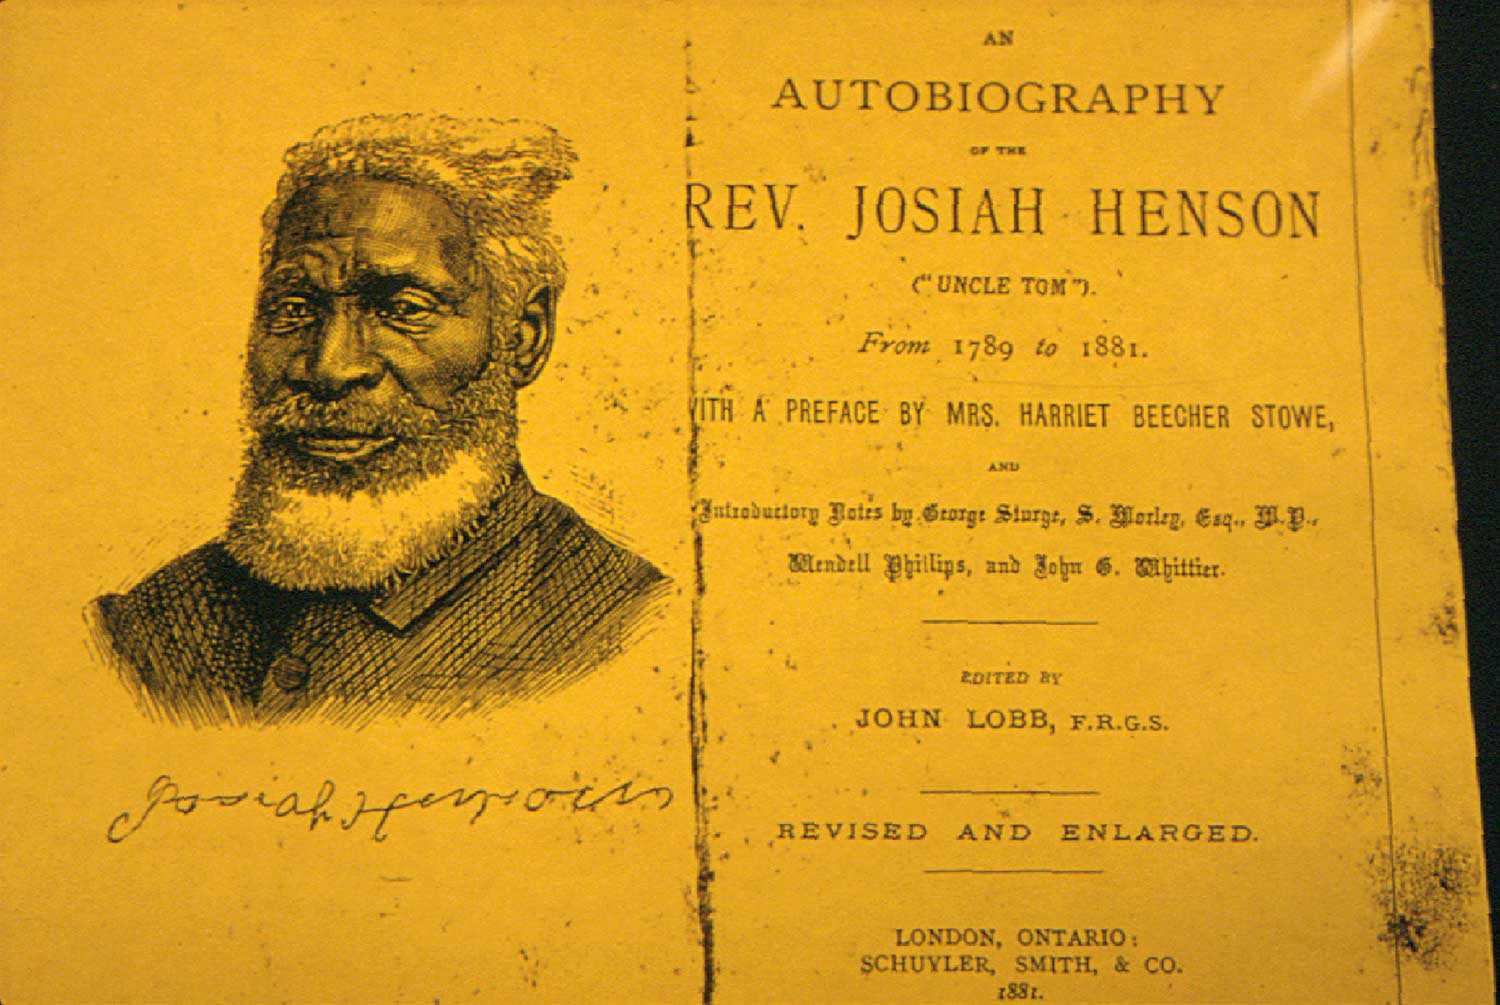 Born a slave in Maryland in 1789, Josiah Henson escaped to Canada via the Underground Railroad. Settling in southwestern Ontario, he worked to improve life for the black community and helped to establish the Dawn Settlement. Henson would go on to become an internationally recognized abolitionist, preacher and conductor on the Underground Railroad. His former home is now part of Uncle Tom’s Cabin Historic Site in Dresden.